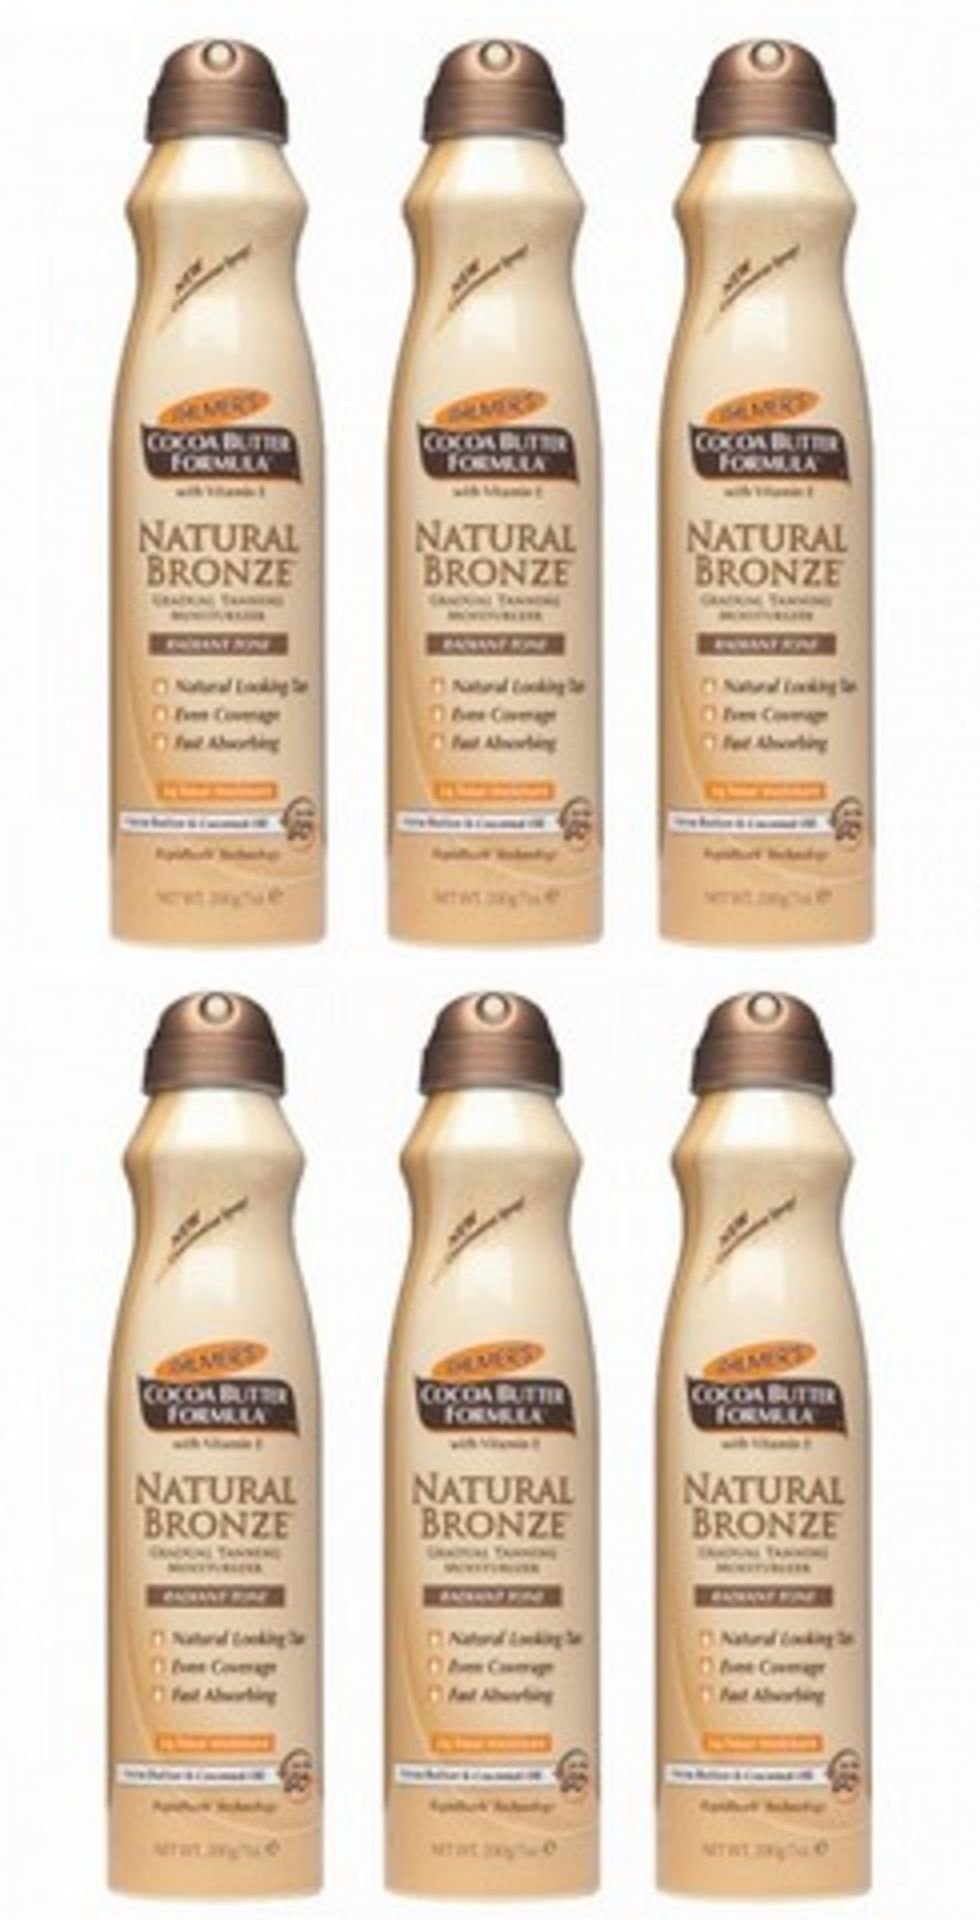 V Brand New Box Of 6 Palmers Cocoa Butter Formula Gradual Tanning Spray (200 g Each)